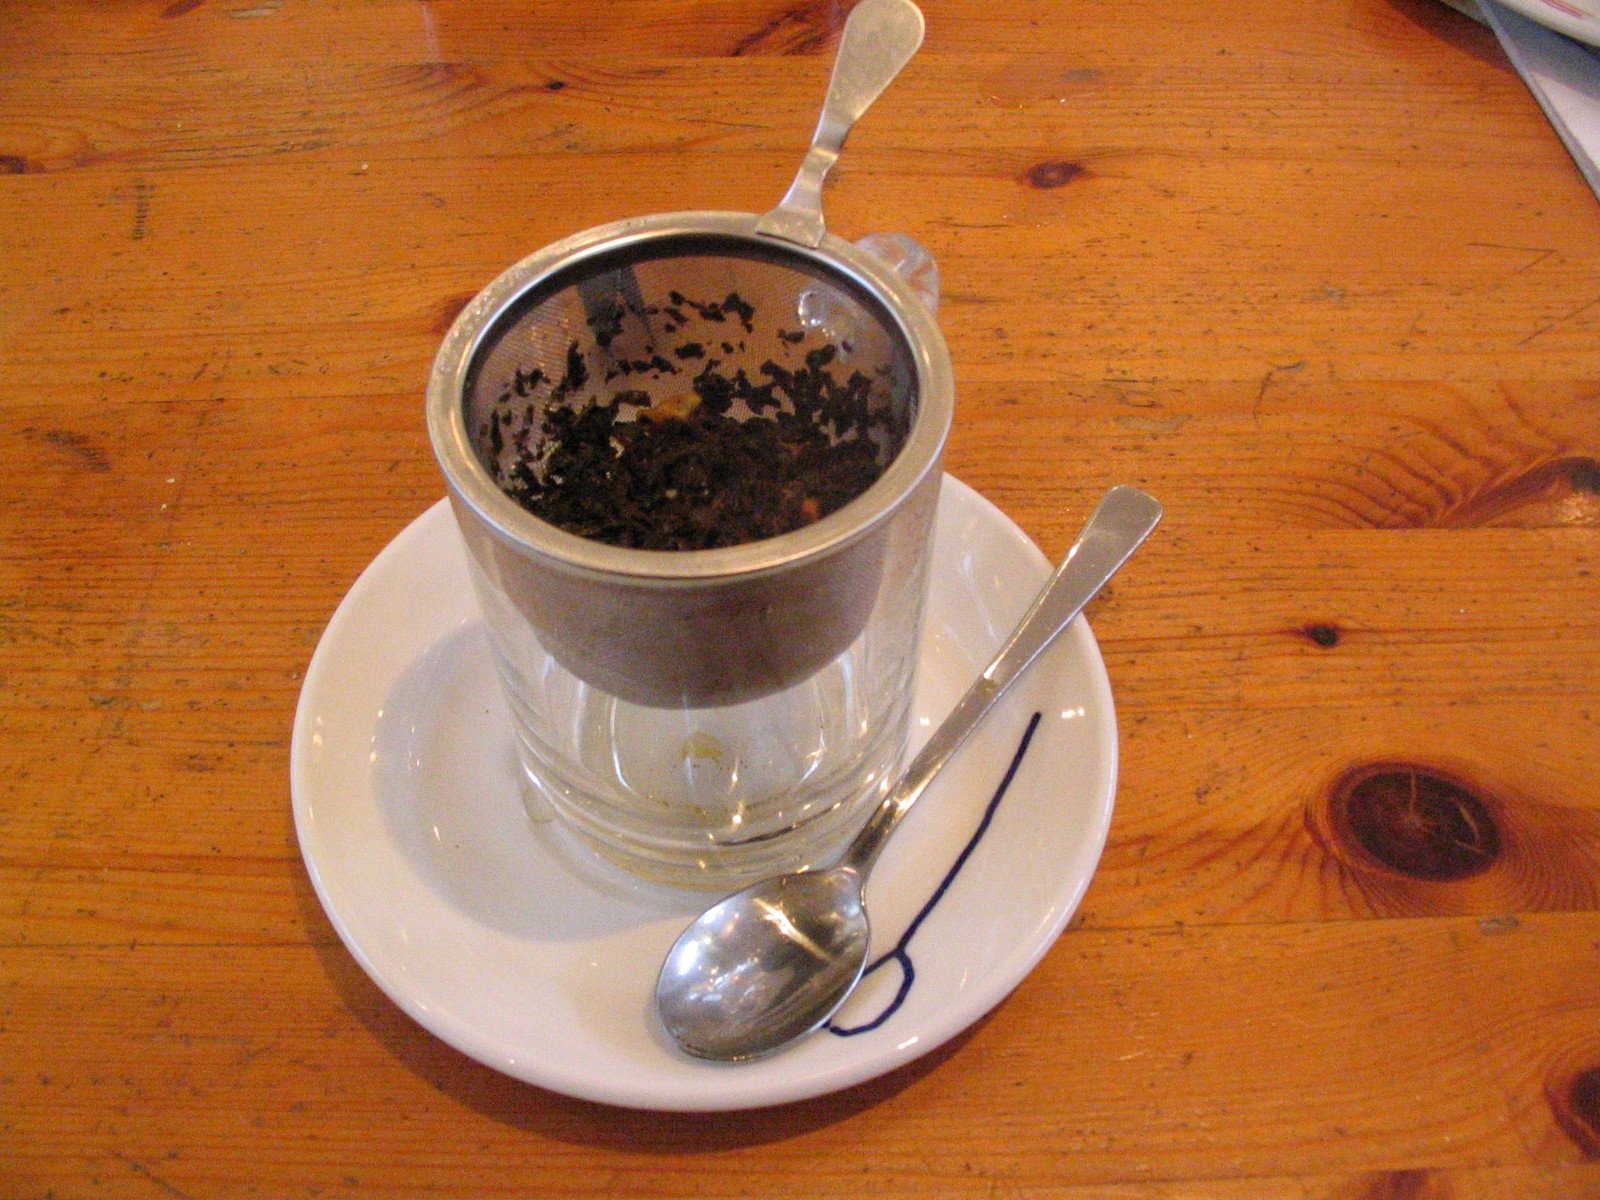 there is a cup of coffee with a spoon next to it